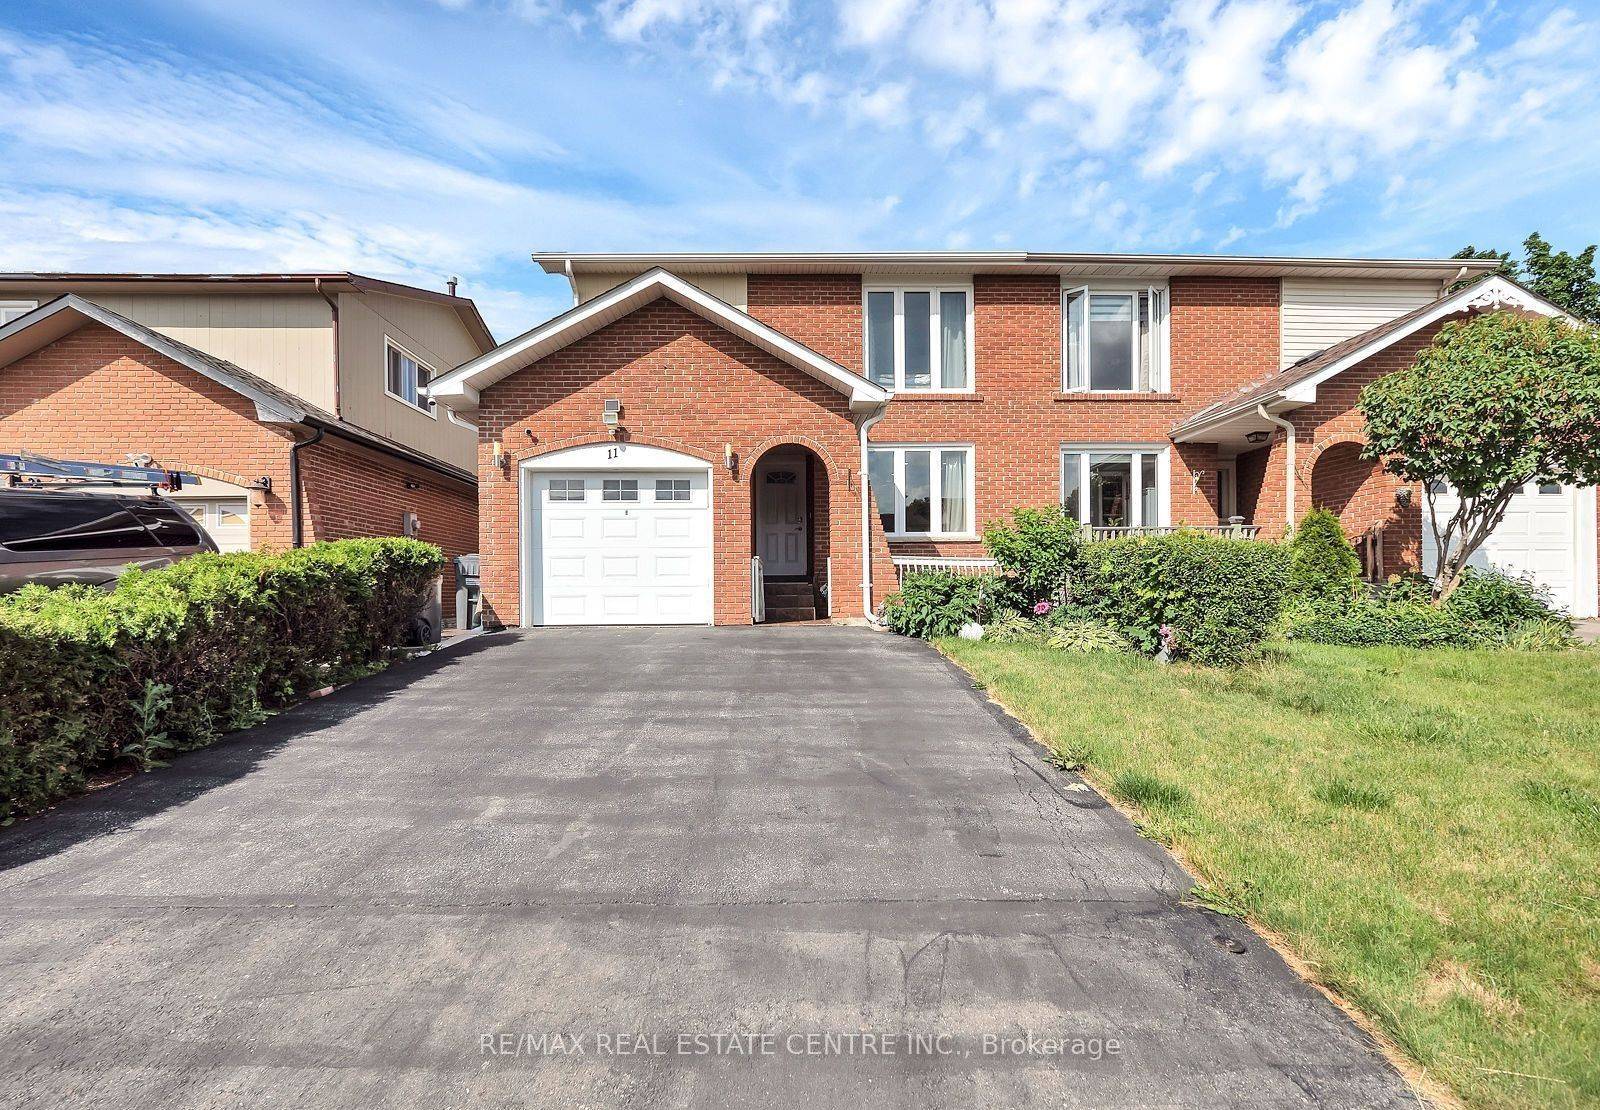 Spacious Functional 5 Level Back Split Semi Detached Home Available In The Family Friendly Neighborhood Of Brampton North.